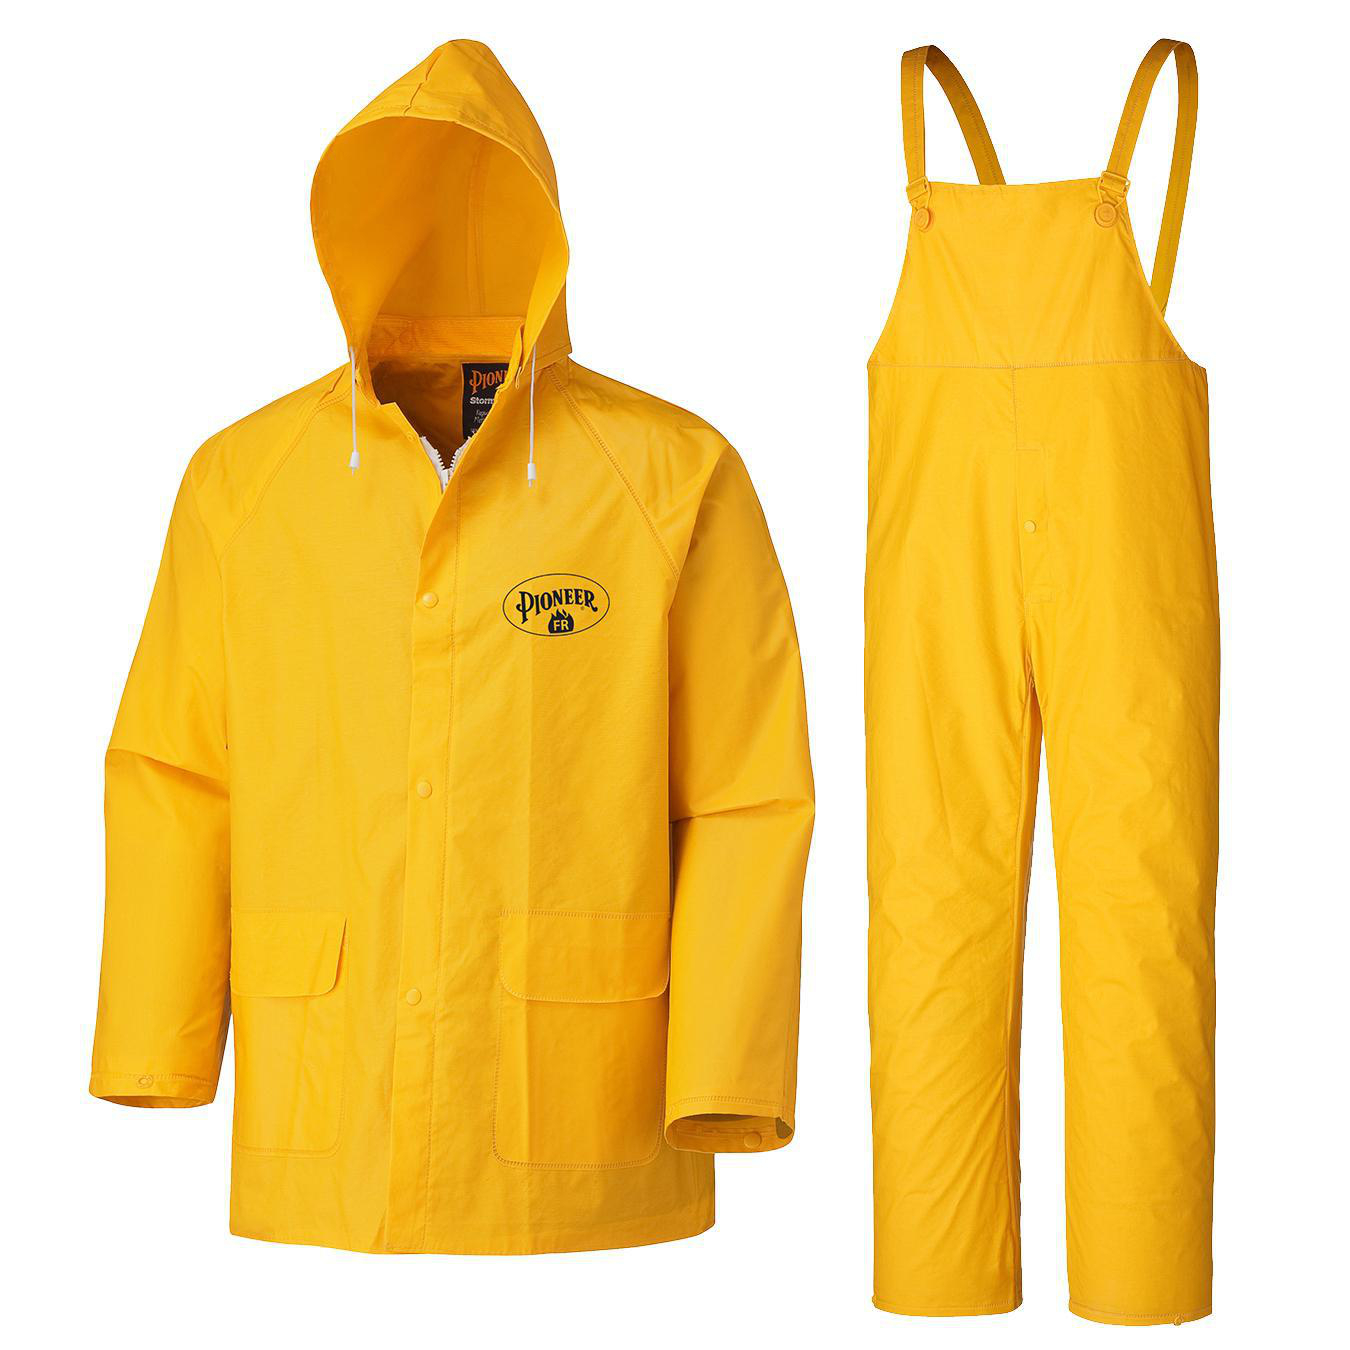 Pioneer V3510160-5XL Heavy-Duty Flame Resistant Jacket and Pants Combo 5XL Rainsuit Yellow 